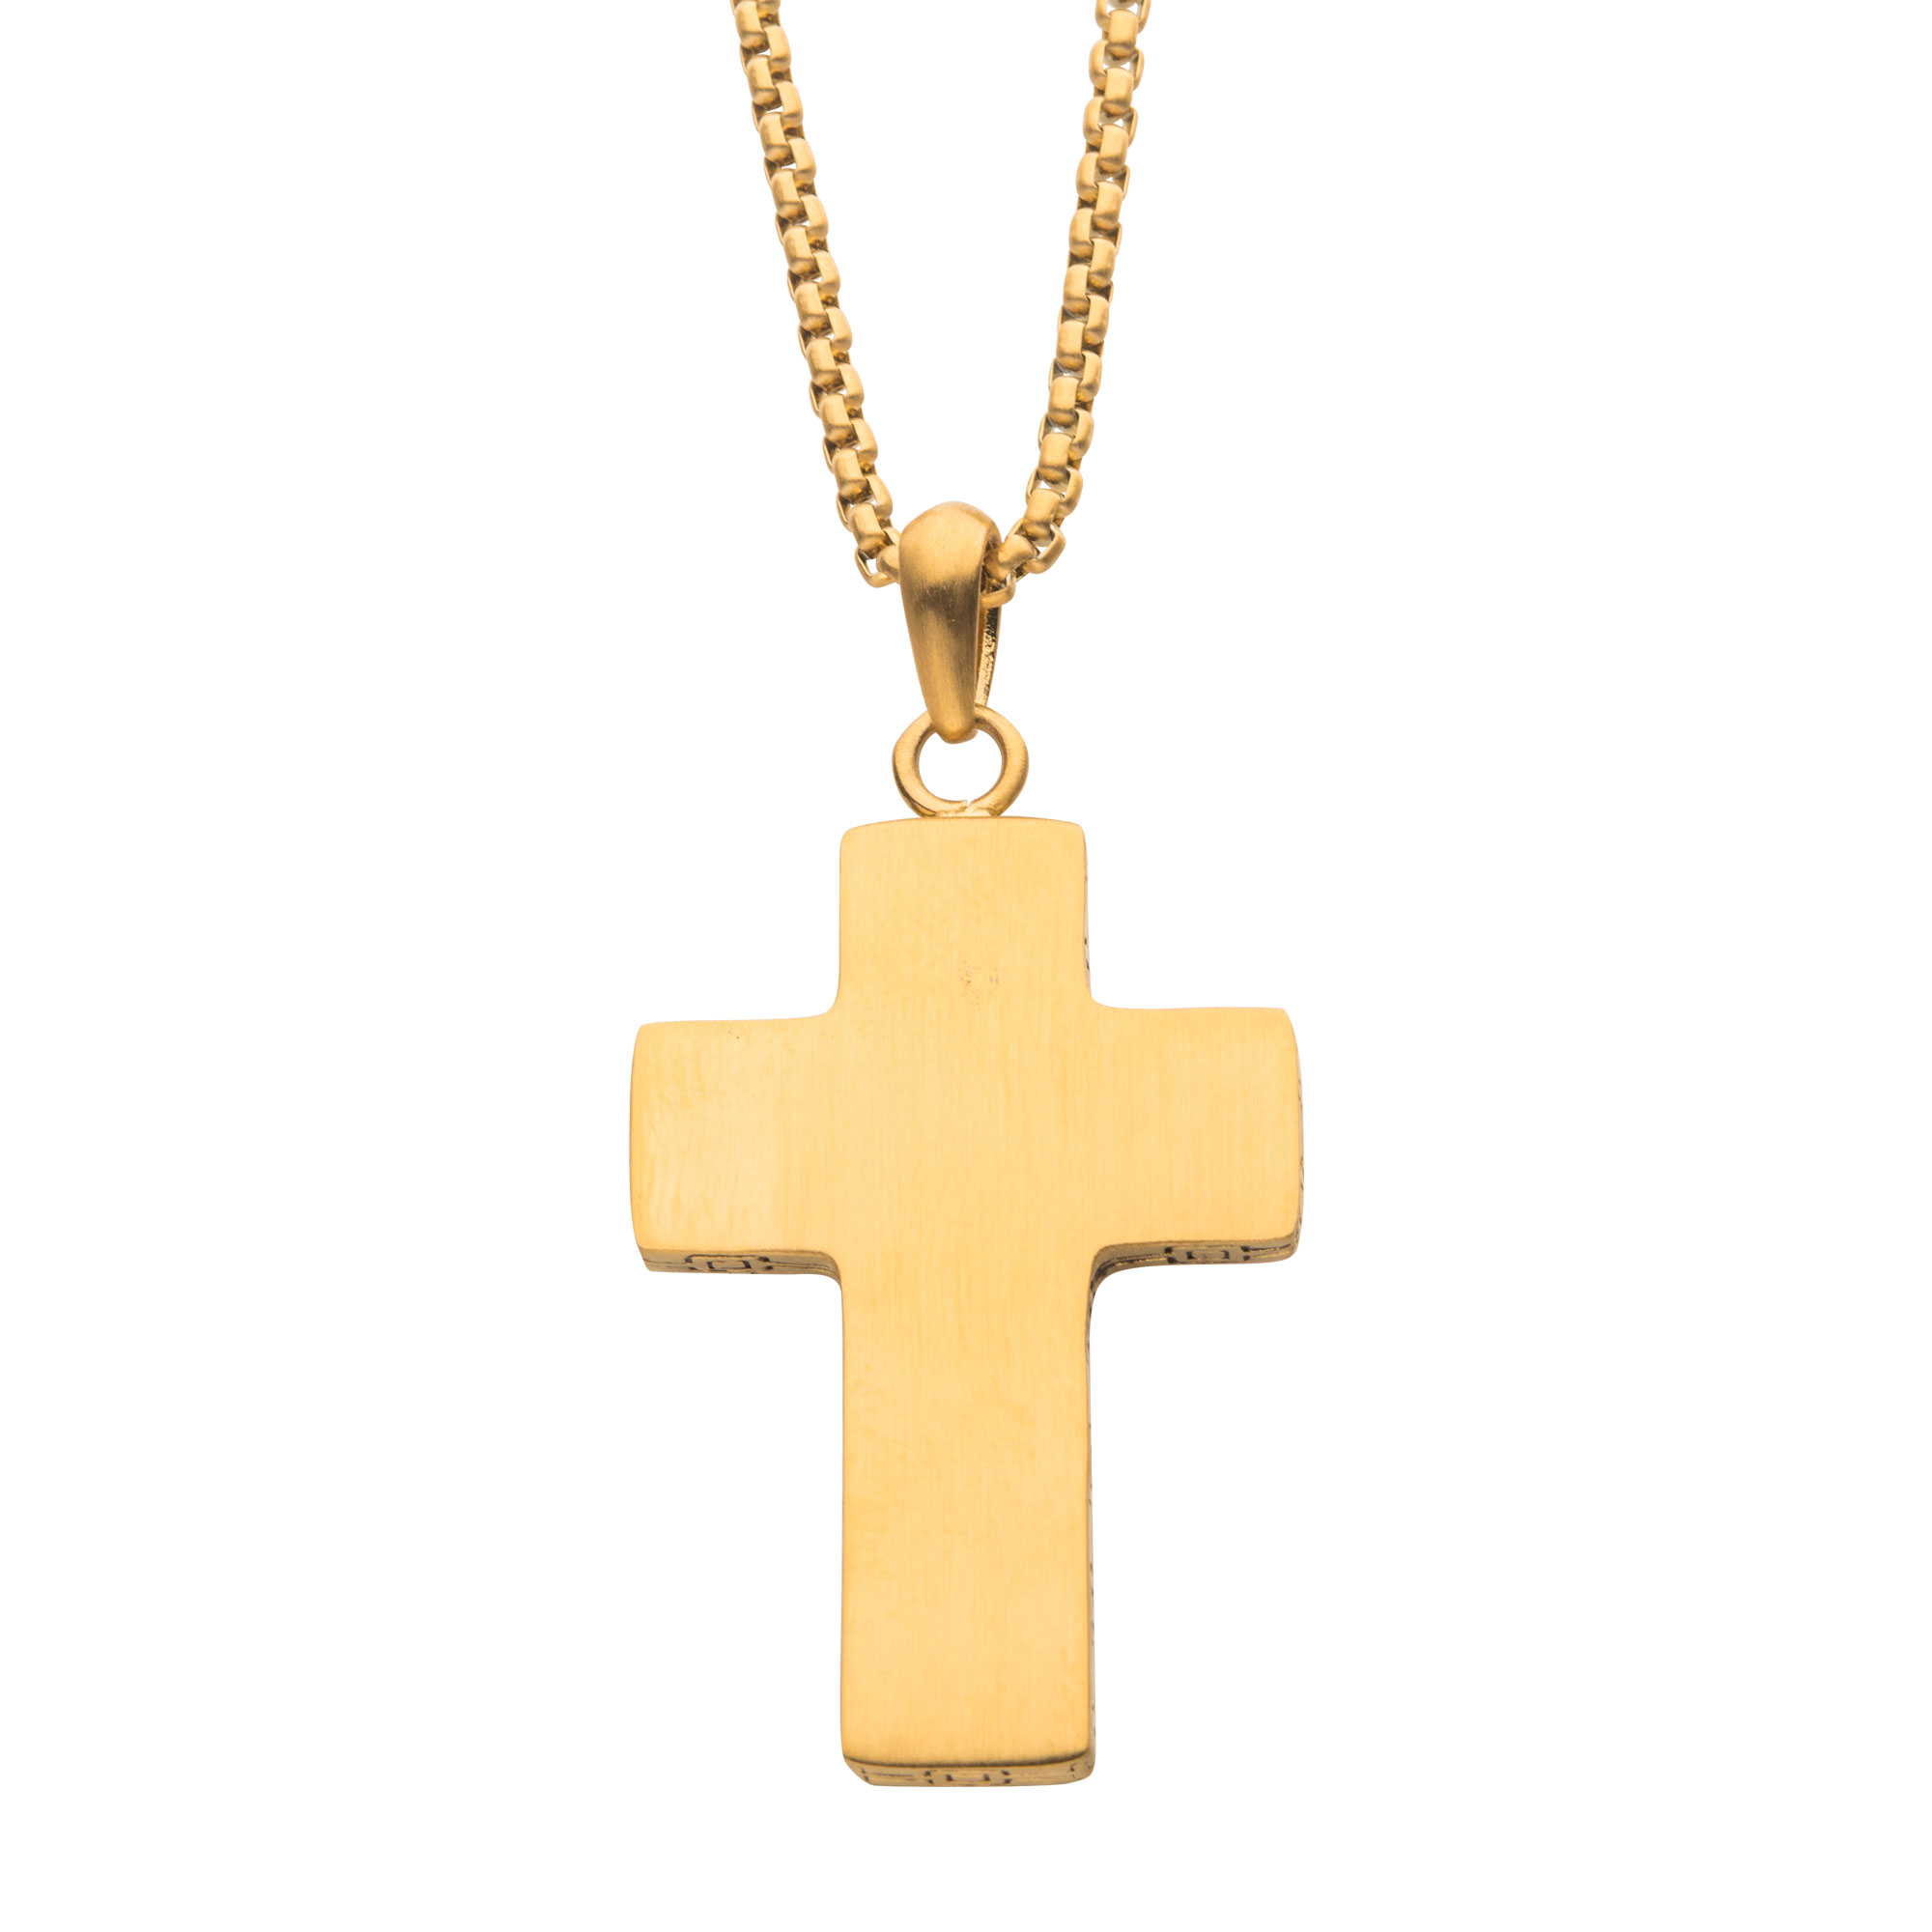 18K Gold IP Engravable Cross Pendant with Round Box Chain Morin Jewelers Southbridge, MA